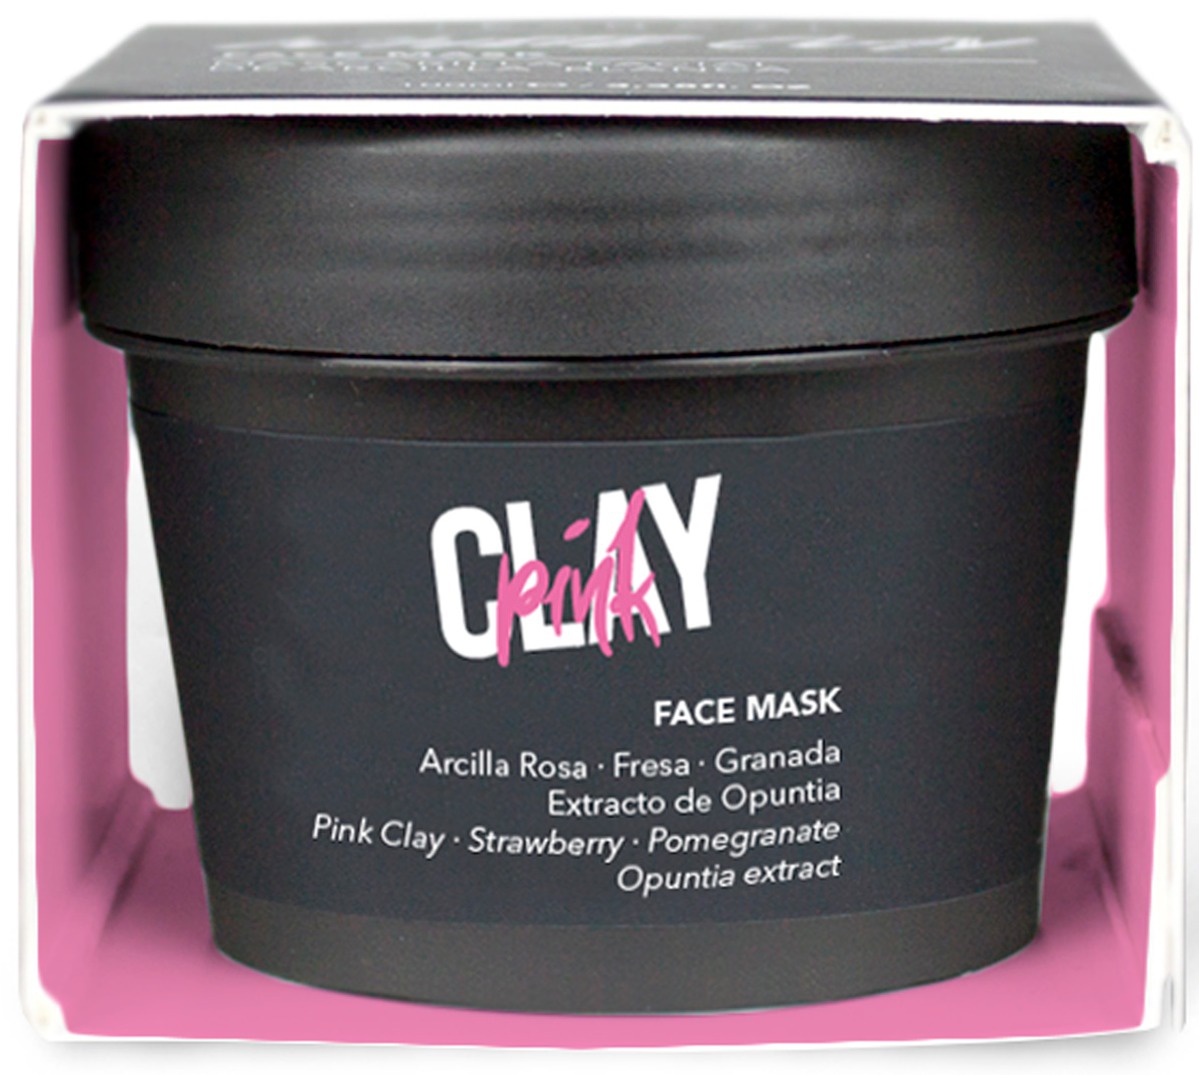 Fancy Handy Face Mask Pink Clay